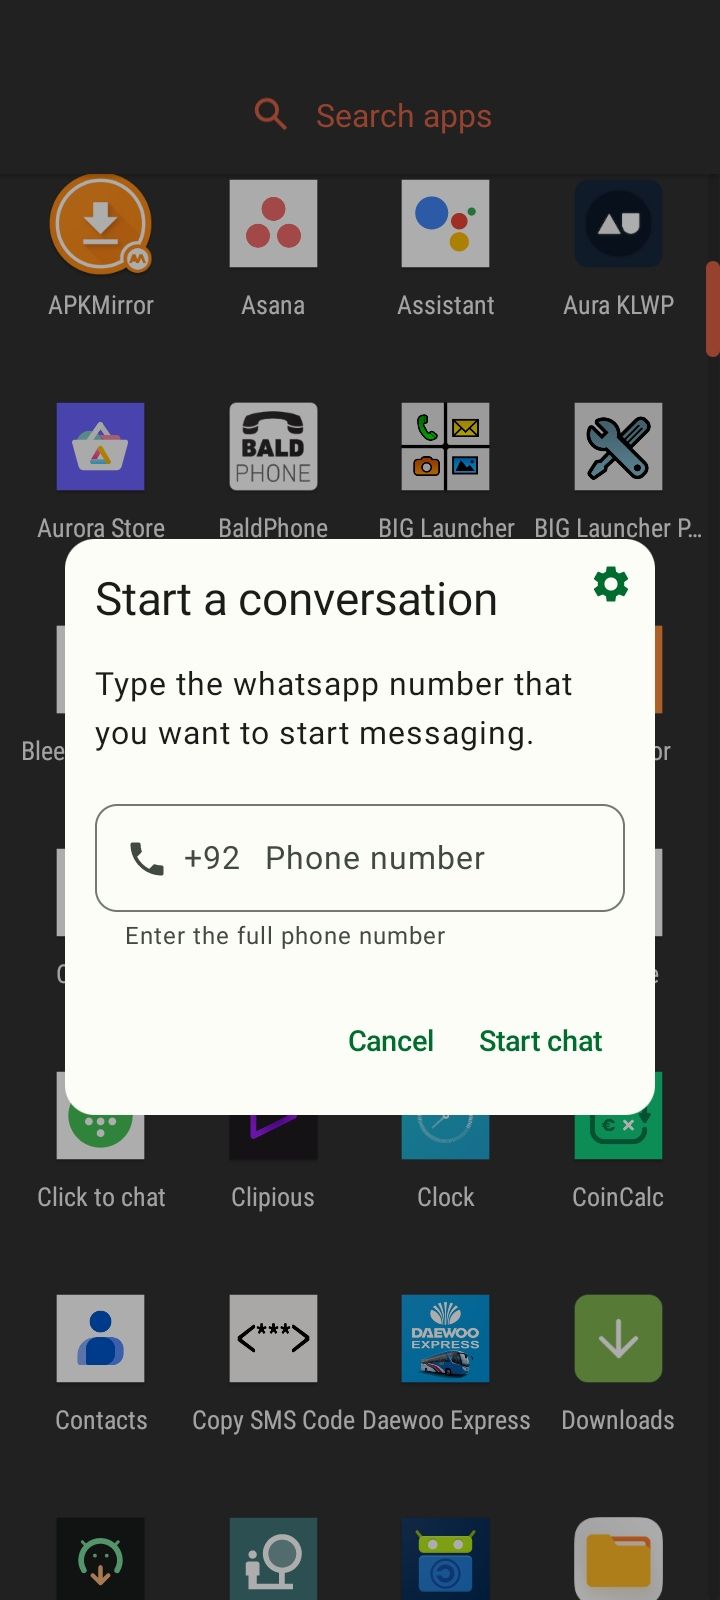 Starting a new WhatsApp chat using the ChatLaunch app on Android.